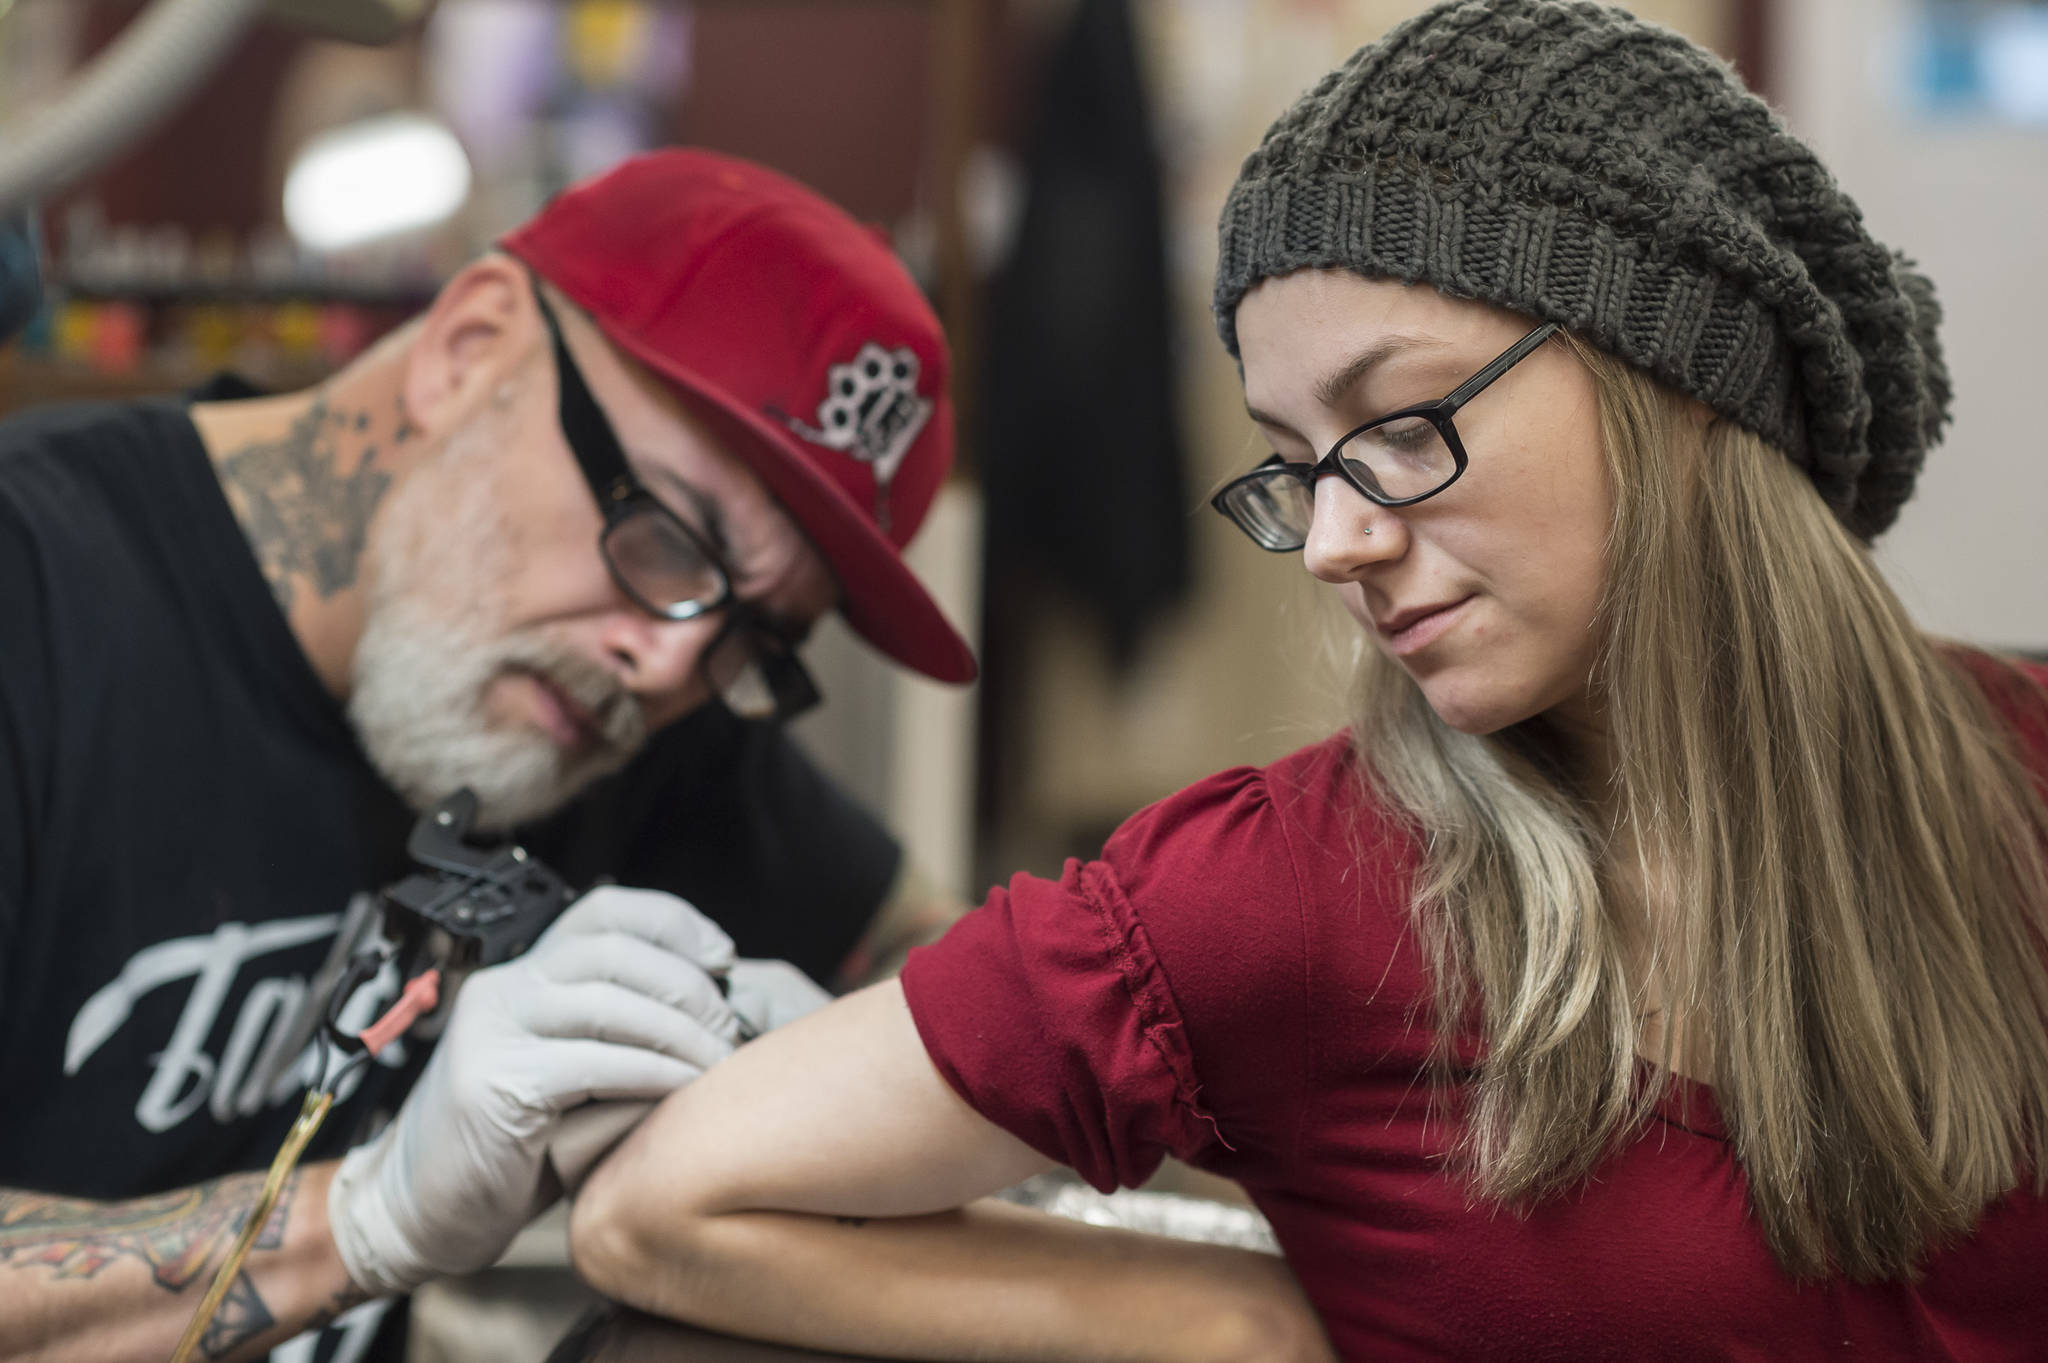 Tattoo parlor offers discounts, raise money for suicide prevention